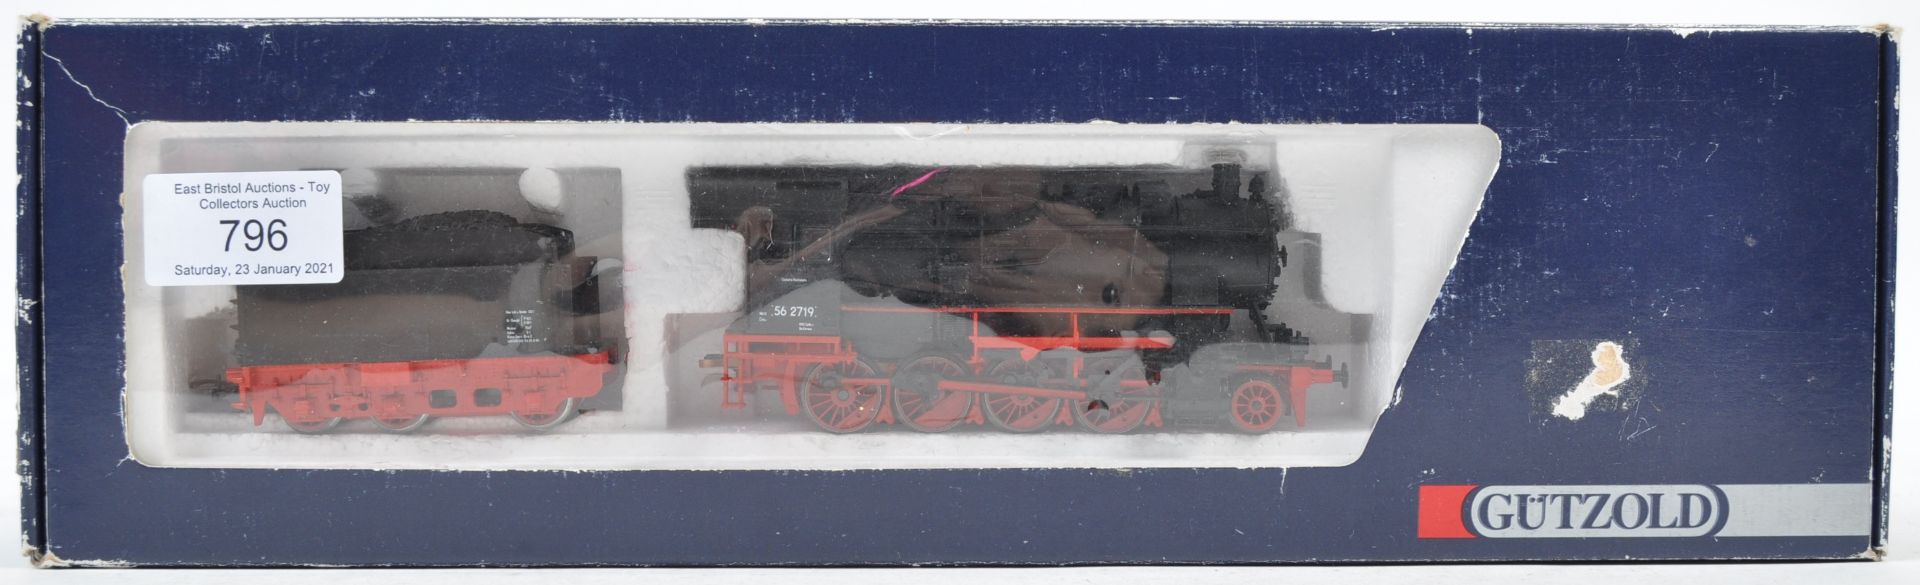 GUTZOLD MADE H0 SCALE 28102 BOXED LOCO ENGINE